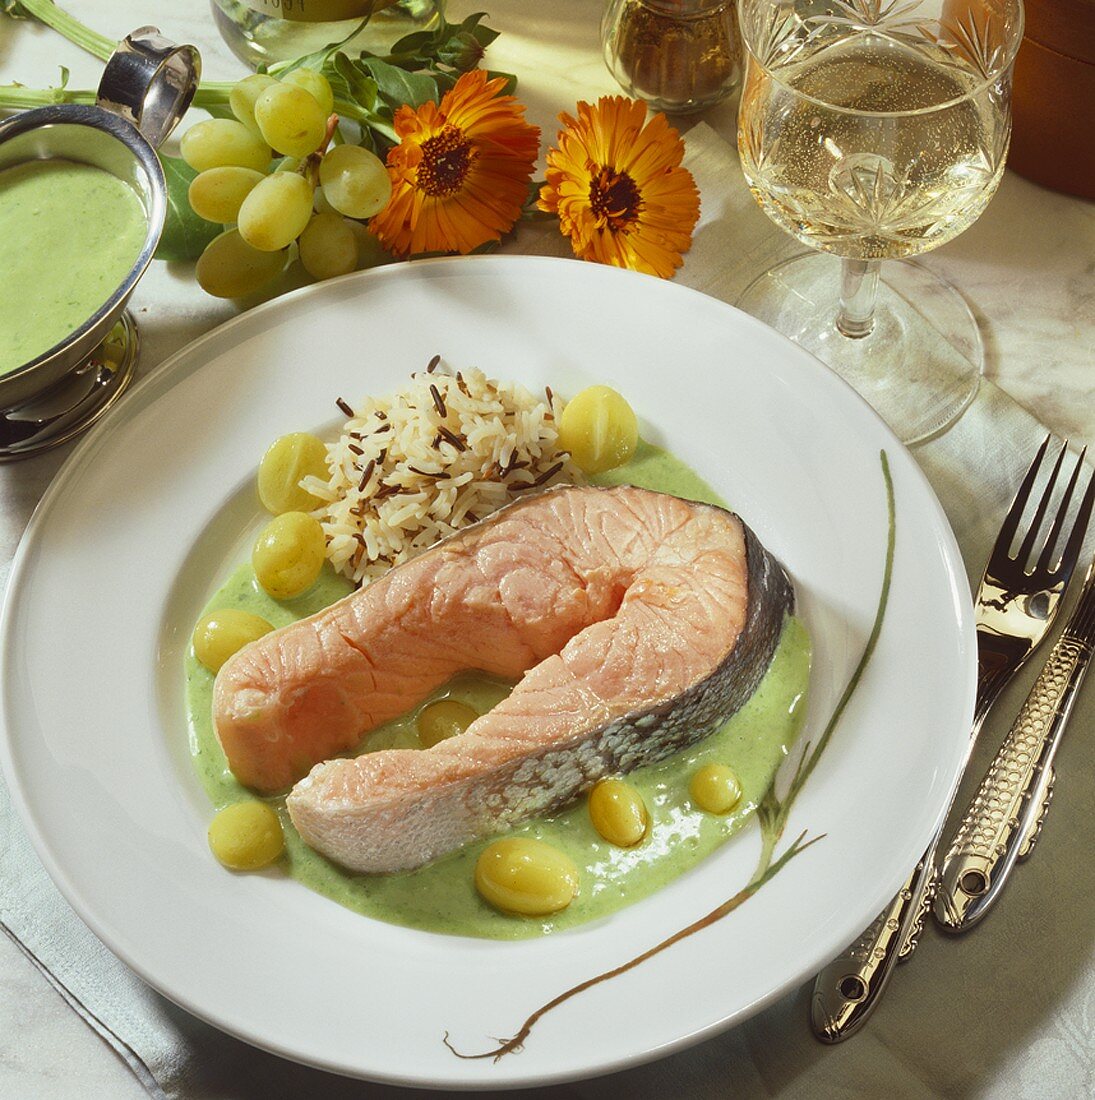 Salmon cutlet with grapes, rice and sorrel sauce